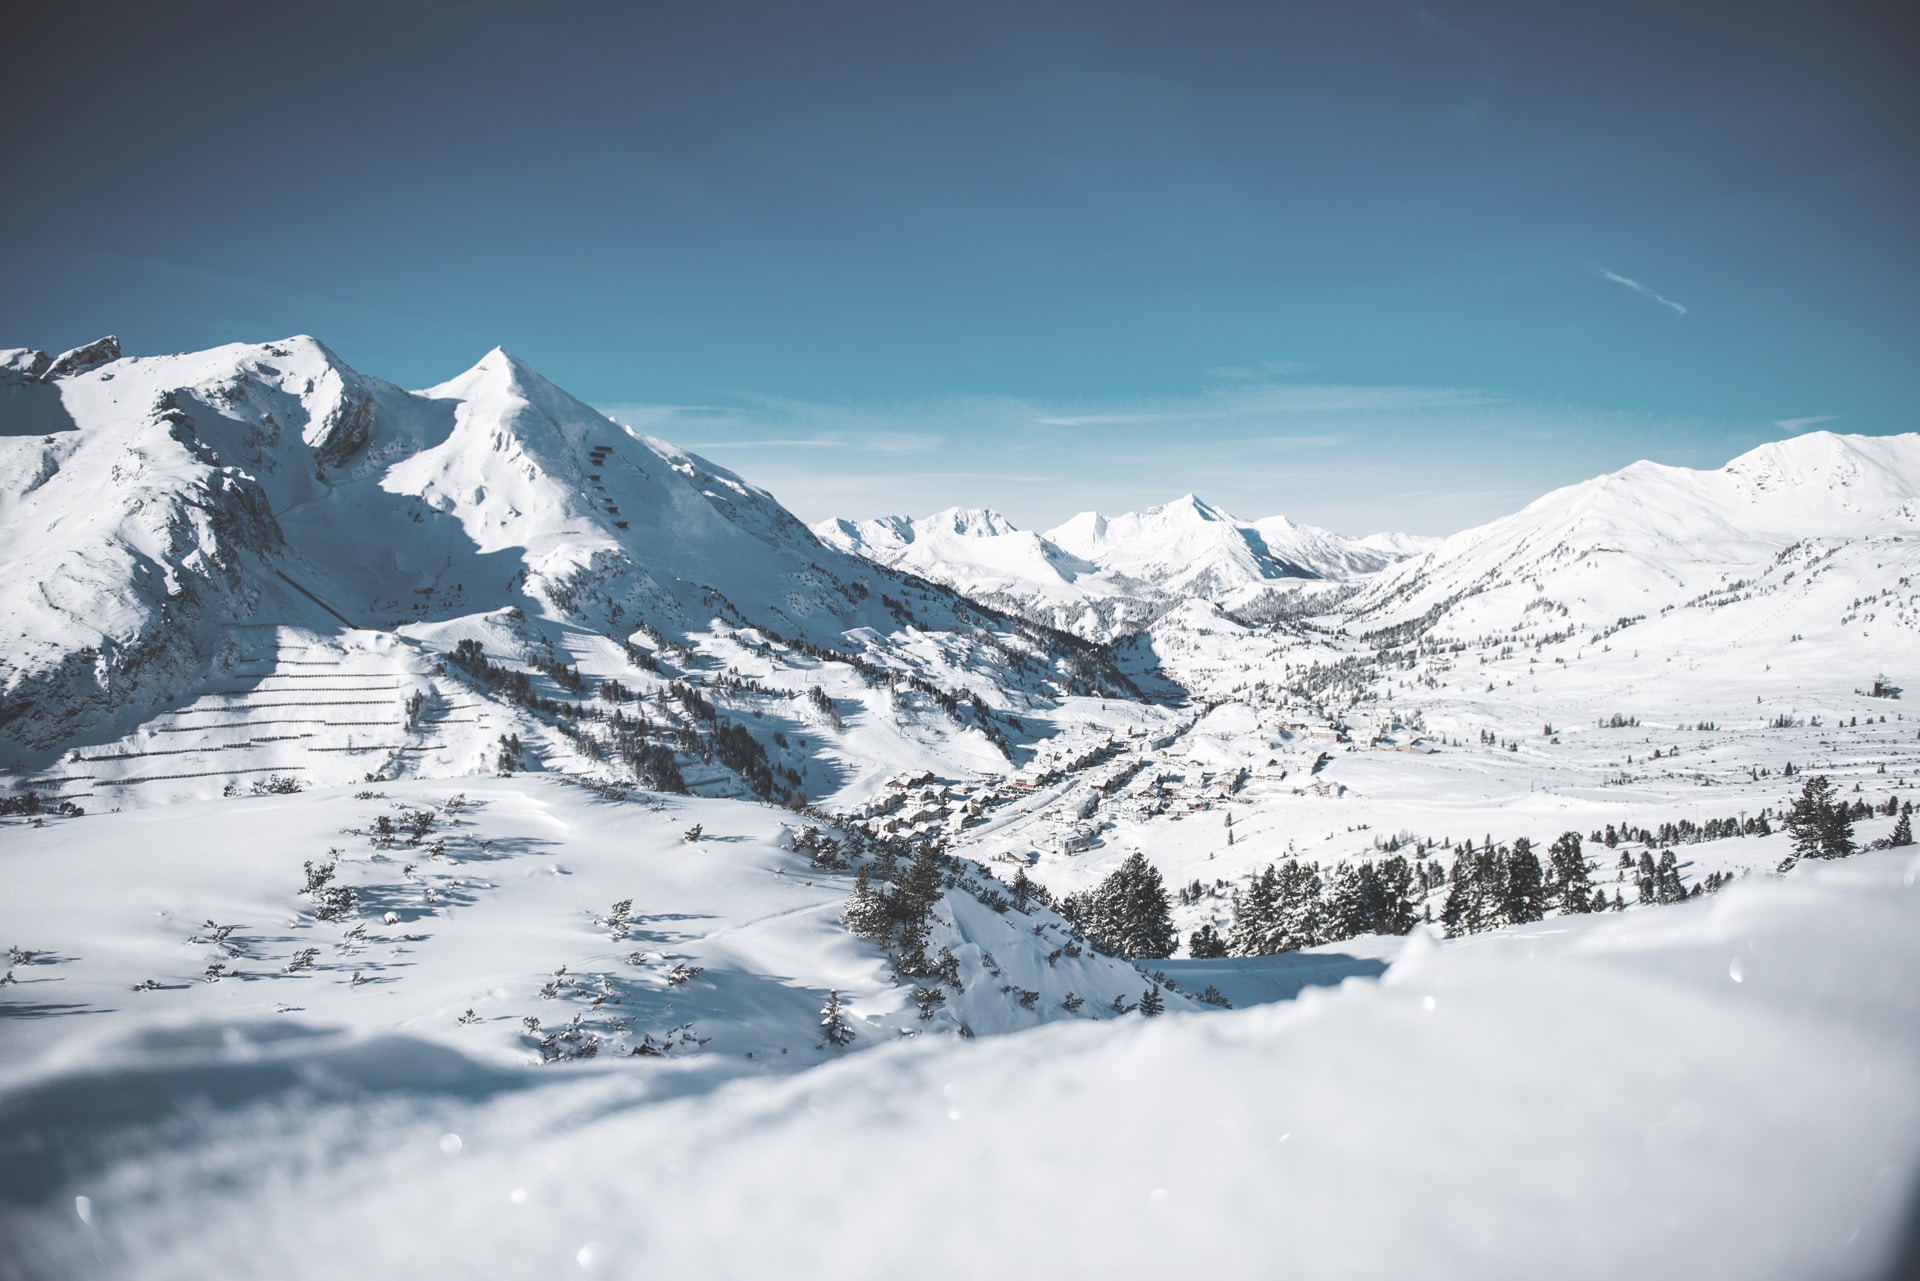 A serene winter landscape: pristine white snow blankets rolling hills and rugged mountains under a clear blue sky.